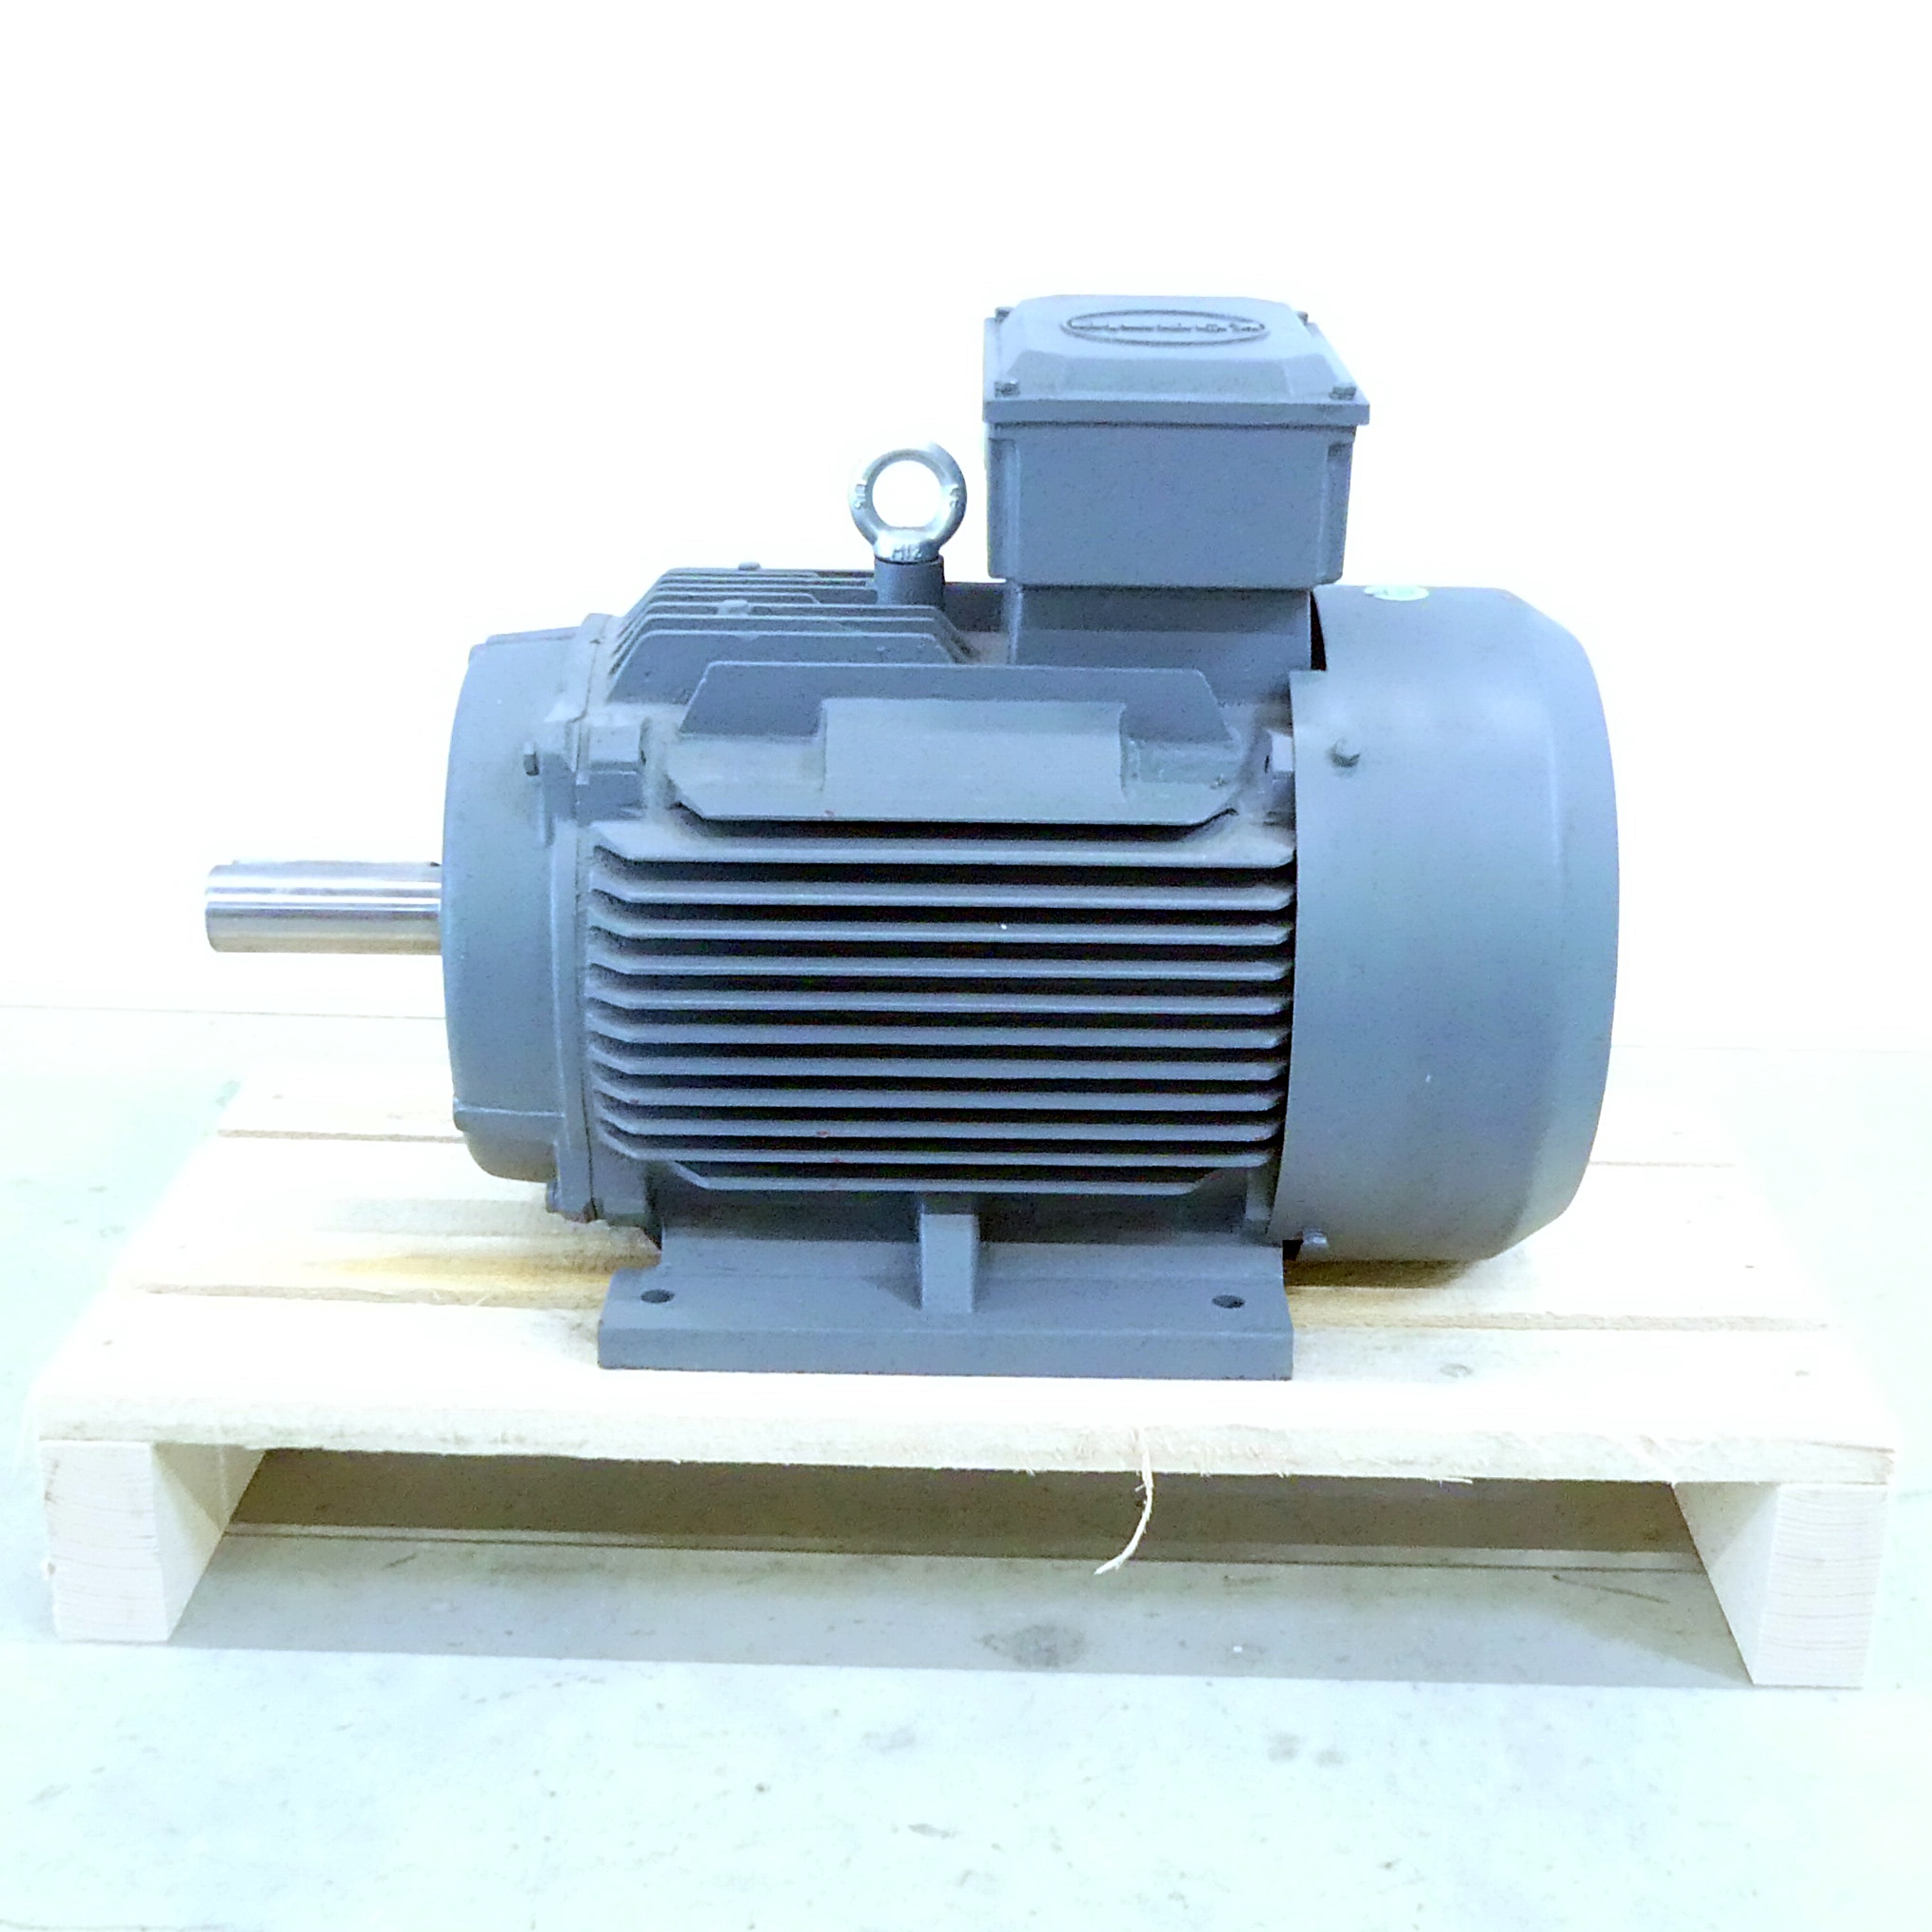 Three-phase motor KDGN2A 160 L 4H 